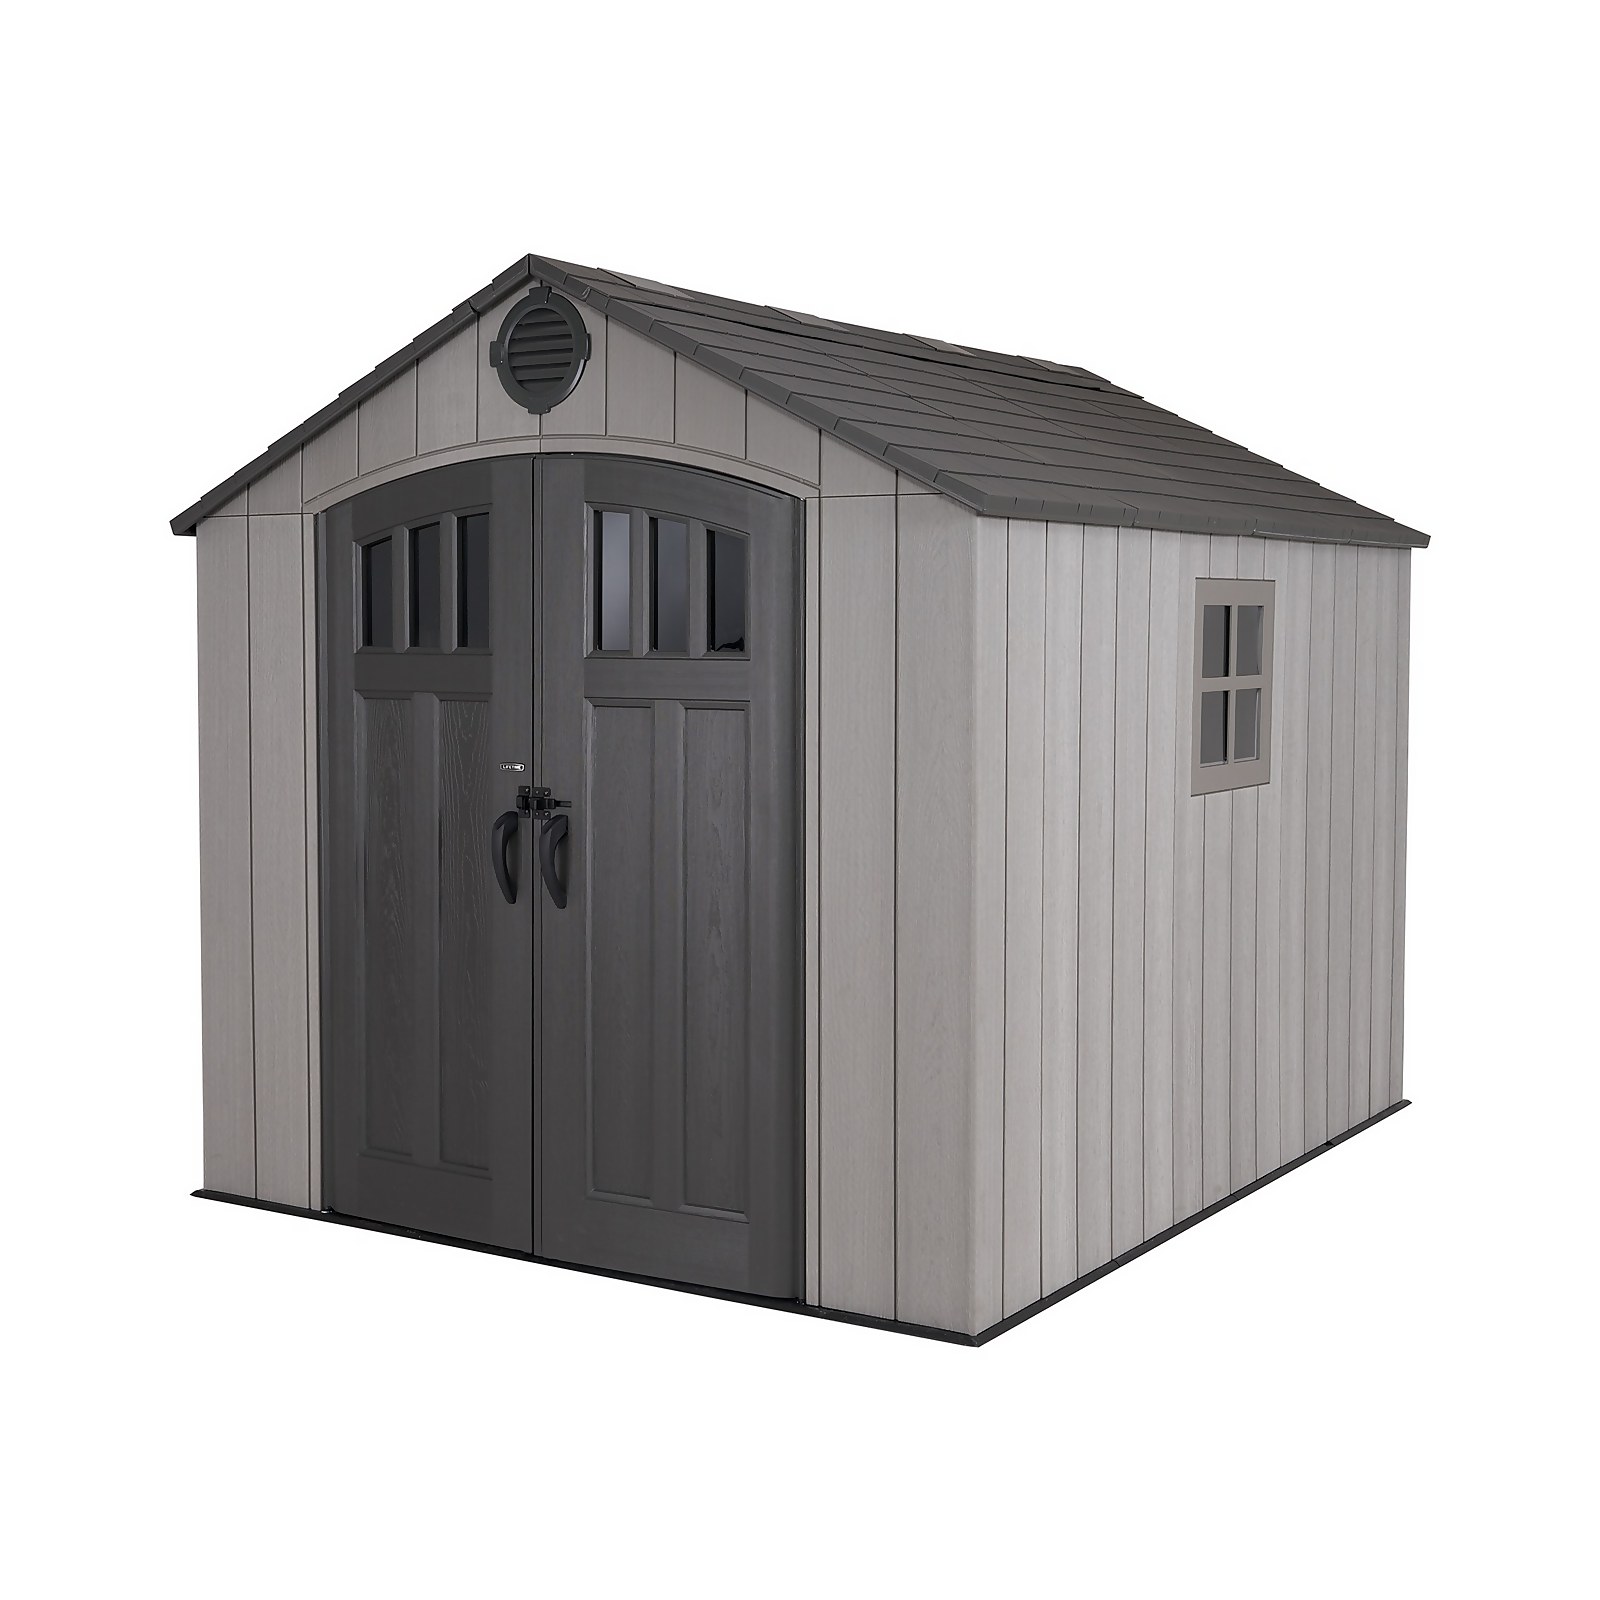 Lifetime Plastic Outdoor Storage Shed - 8x10ft